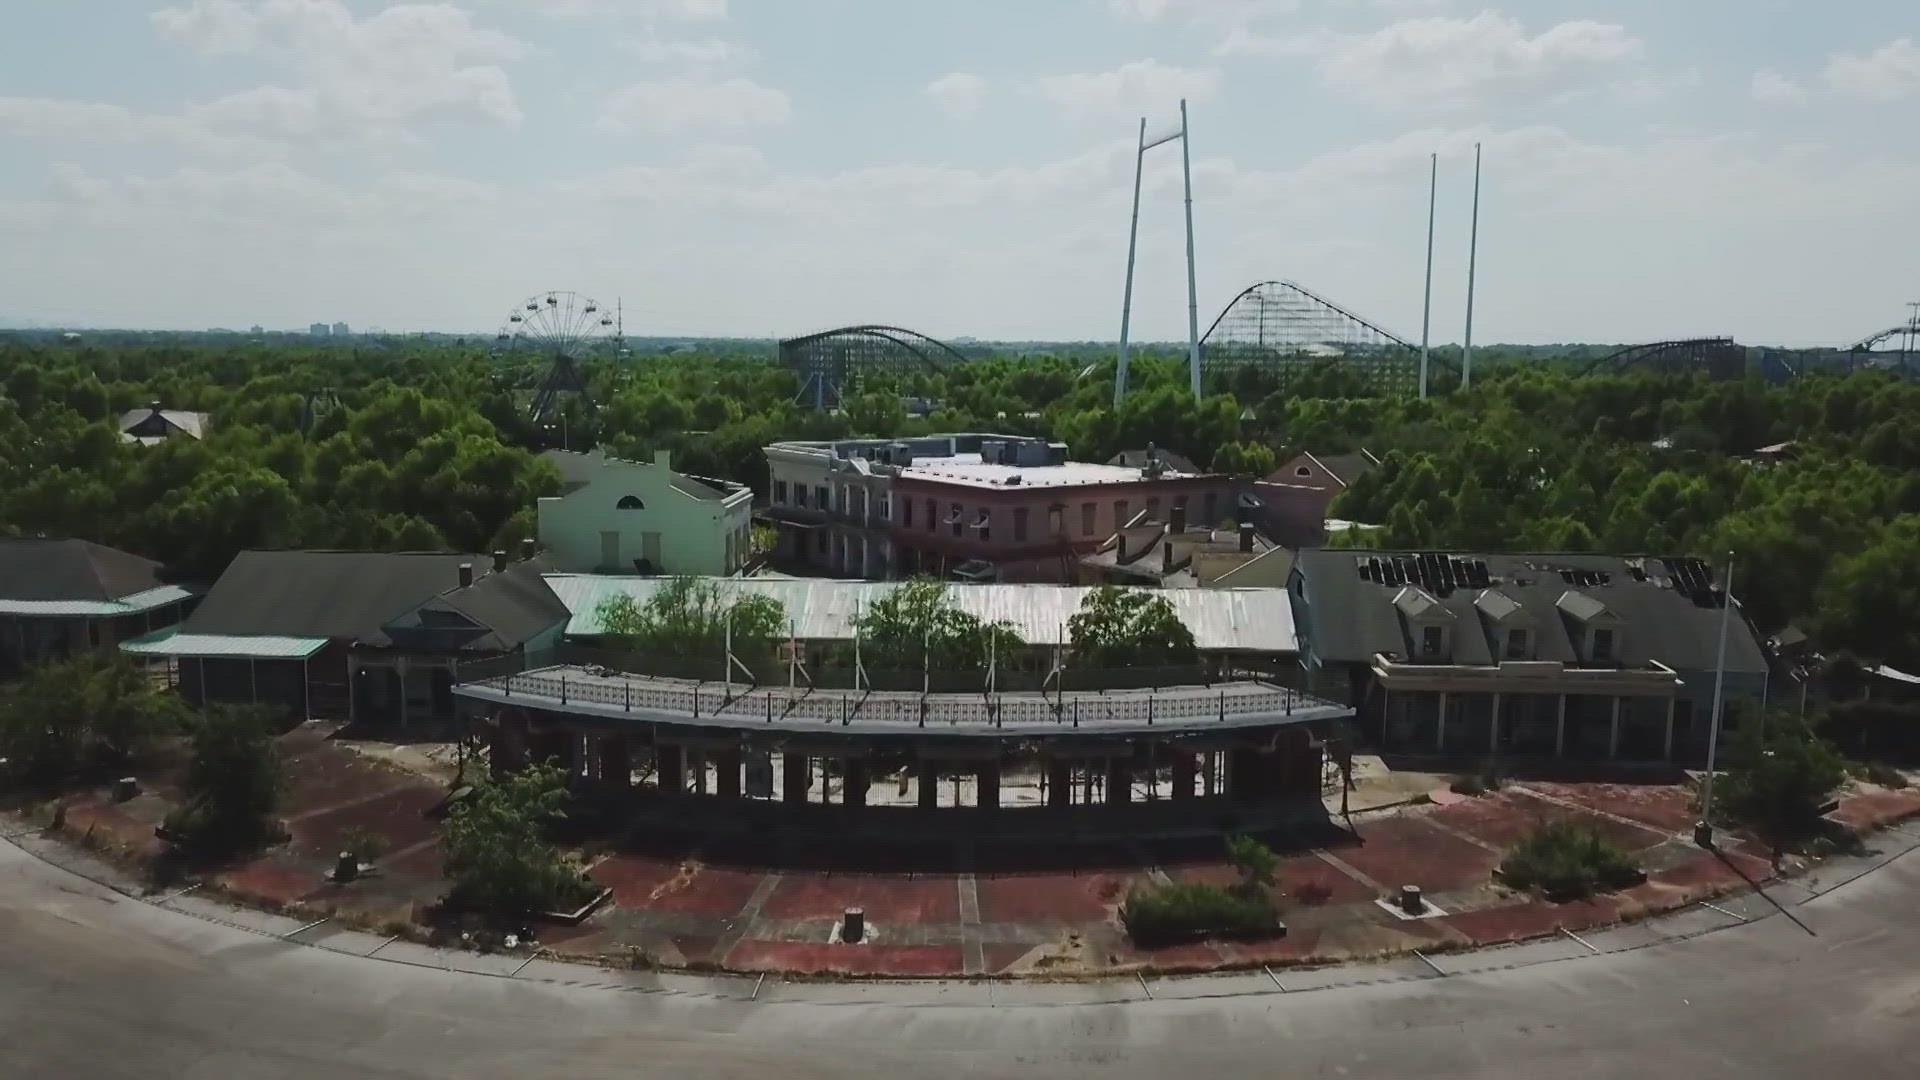 A development agreement was reached between the New Orleans Redevelopment Authority and Bayou Phoenix.